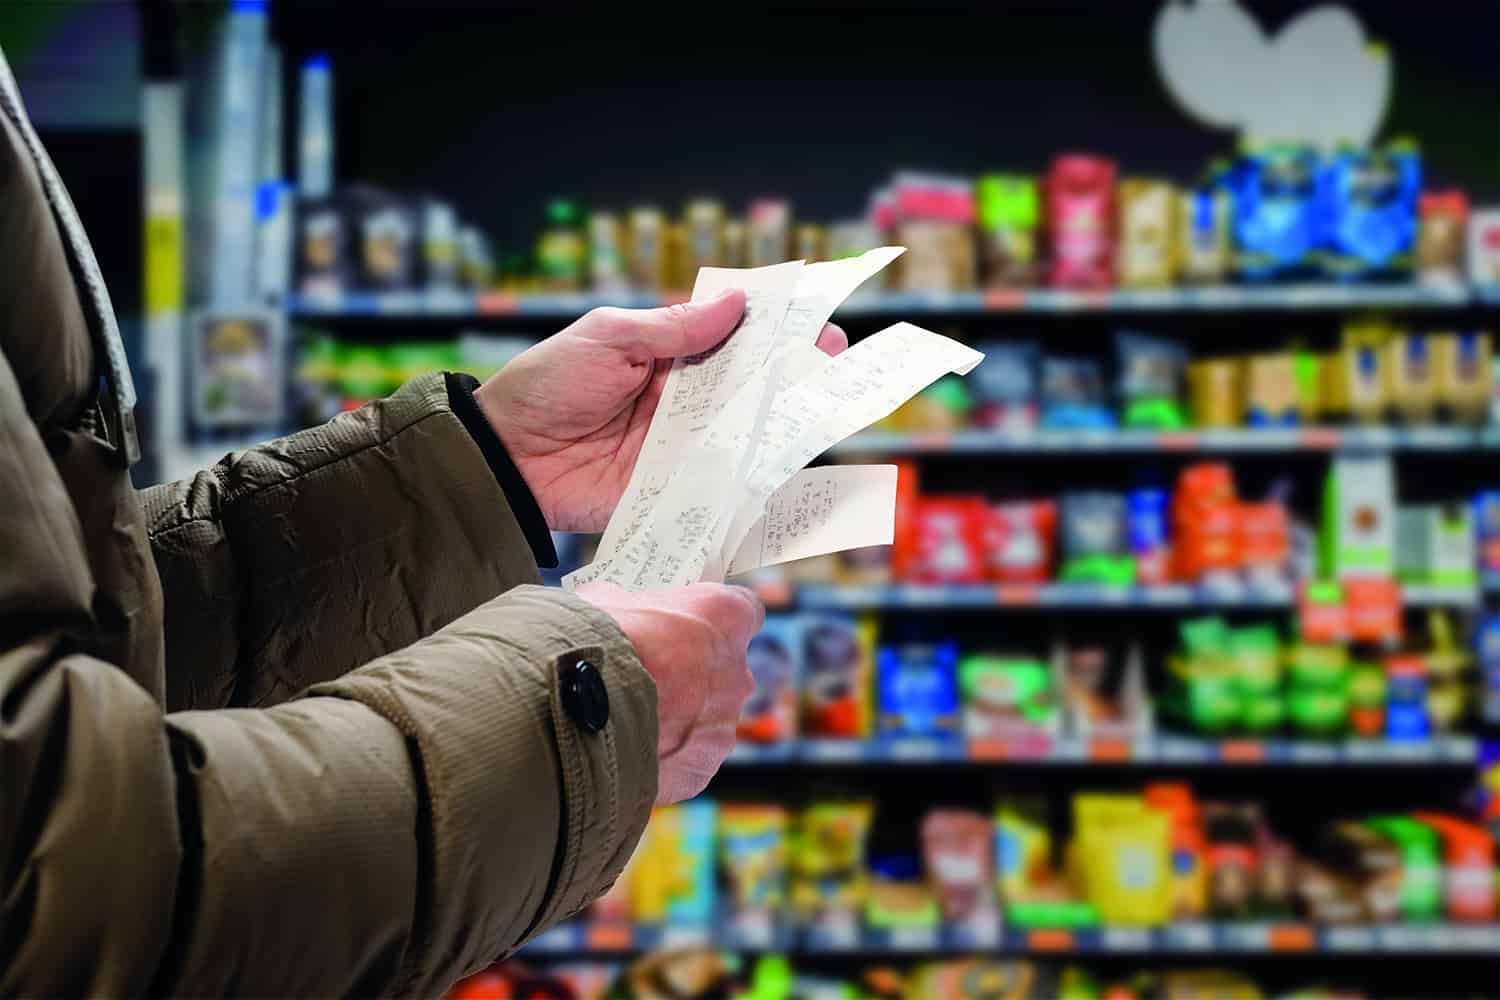 Close-up of man holding shopping receipts in supermarket aisle.